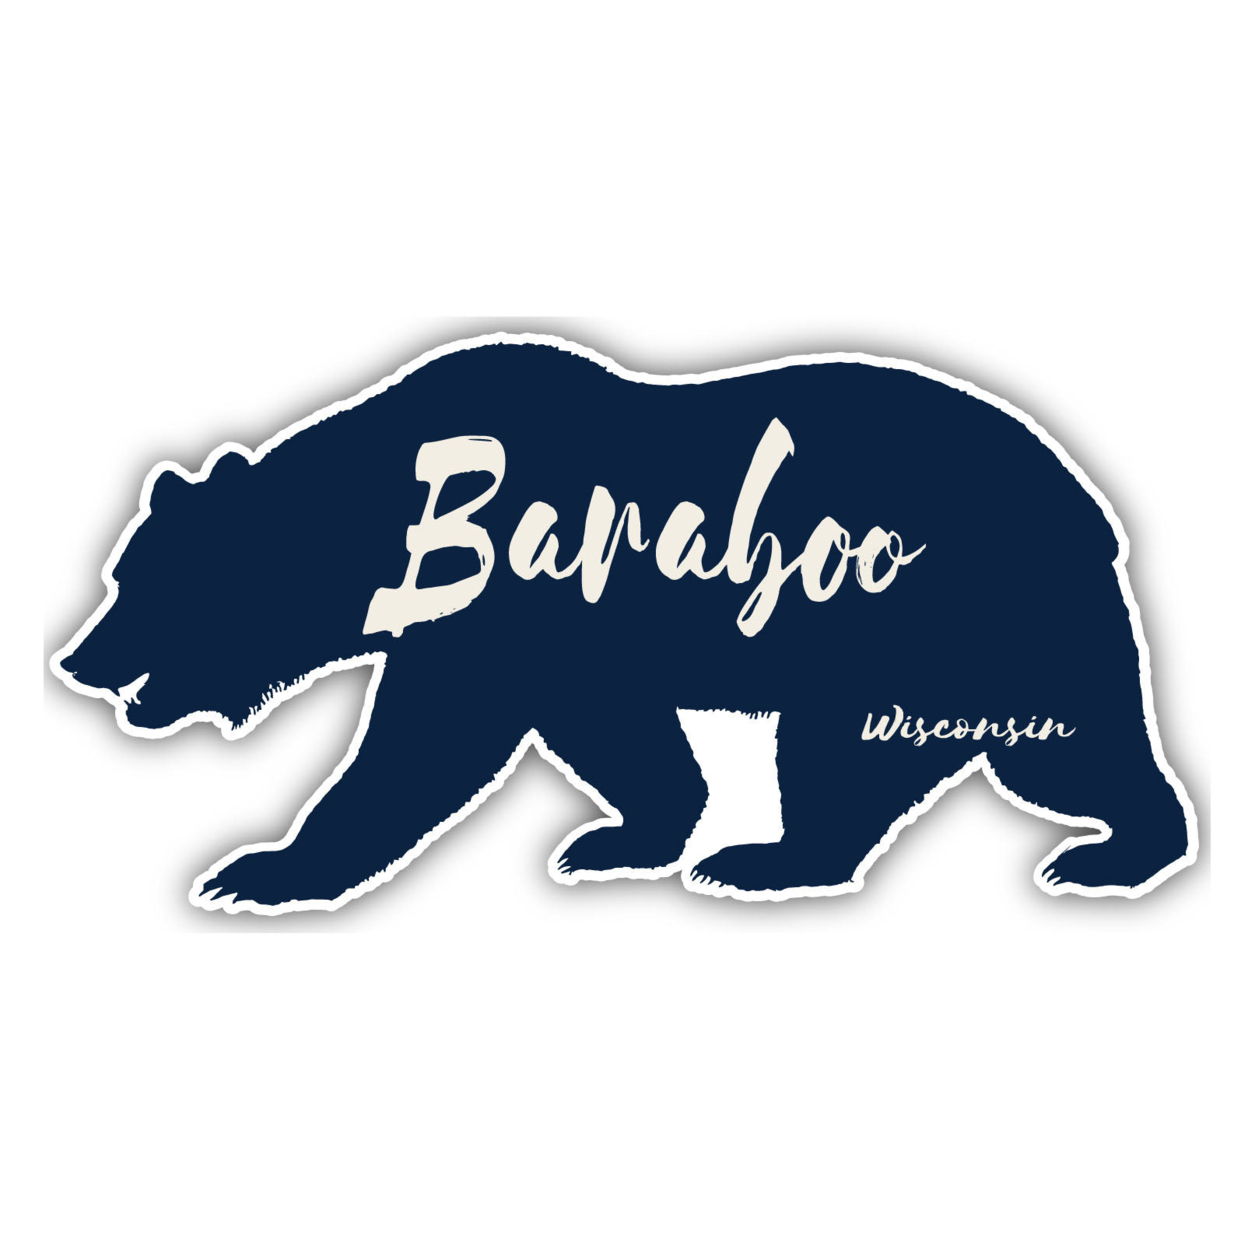 Baraboo Wisconsin Souvenir Decorative Stickers (Choose Theme And Size) - 4-Pack, 4-Inch, Bear